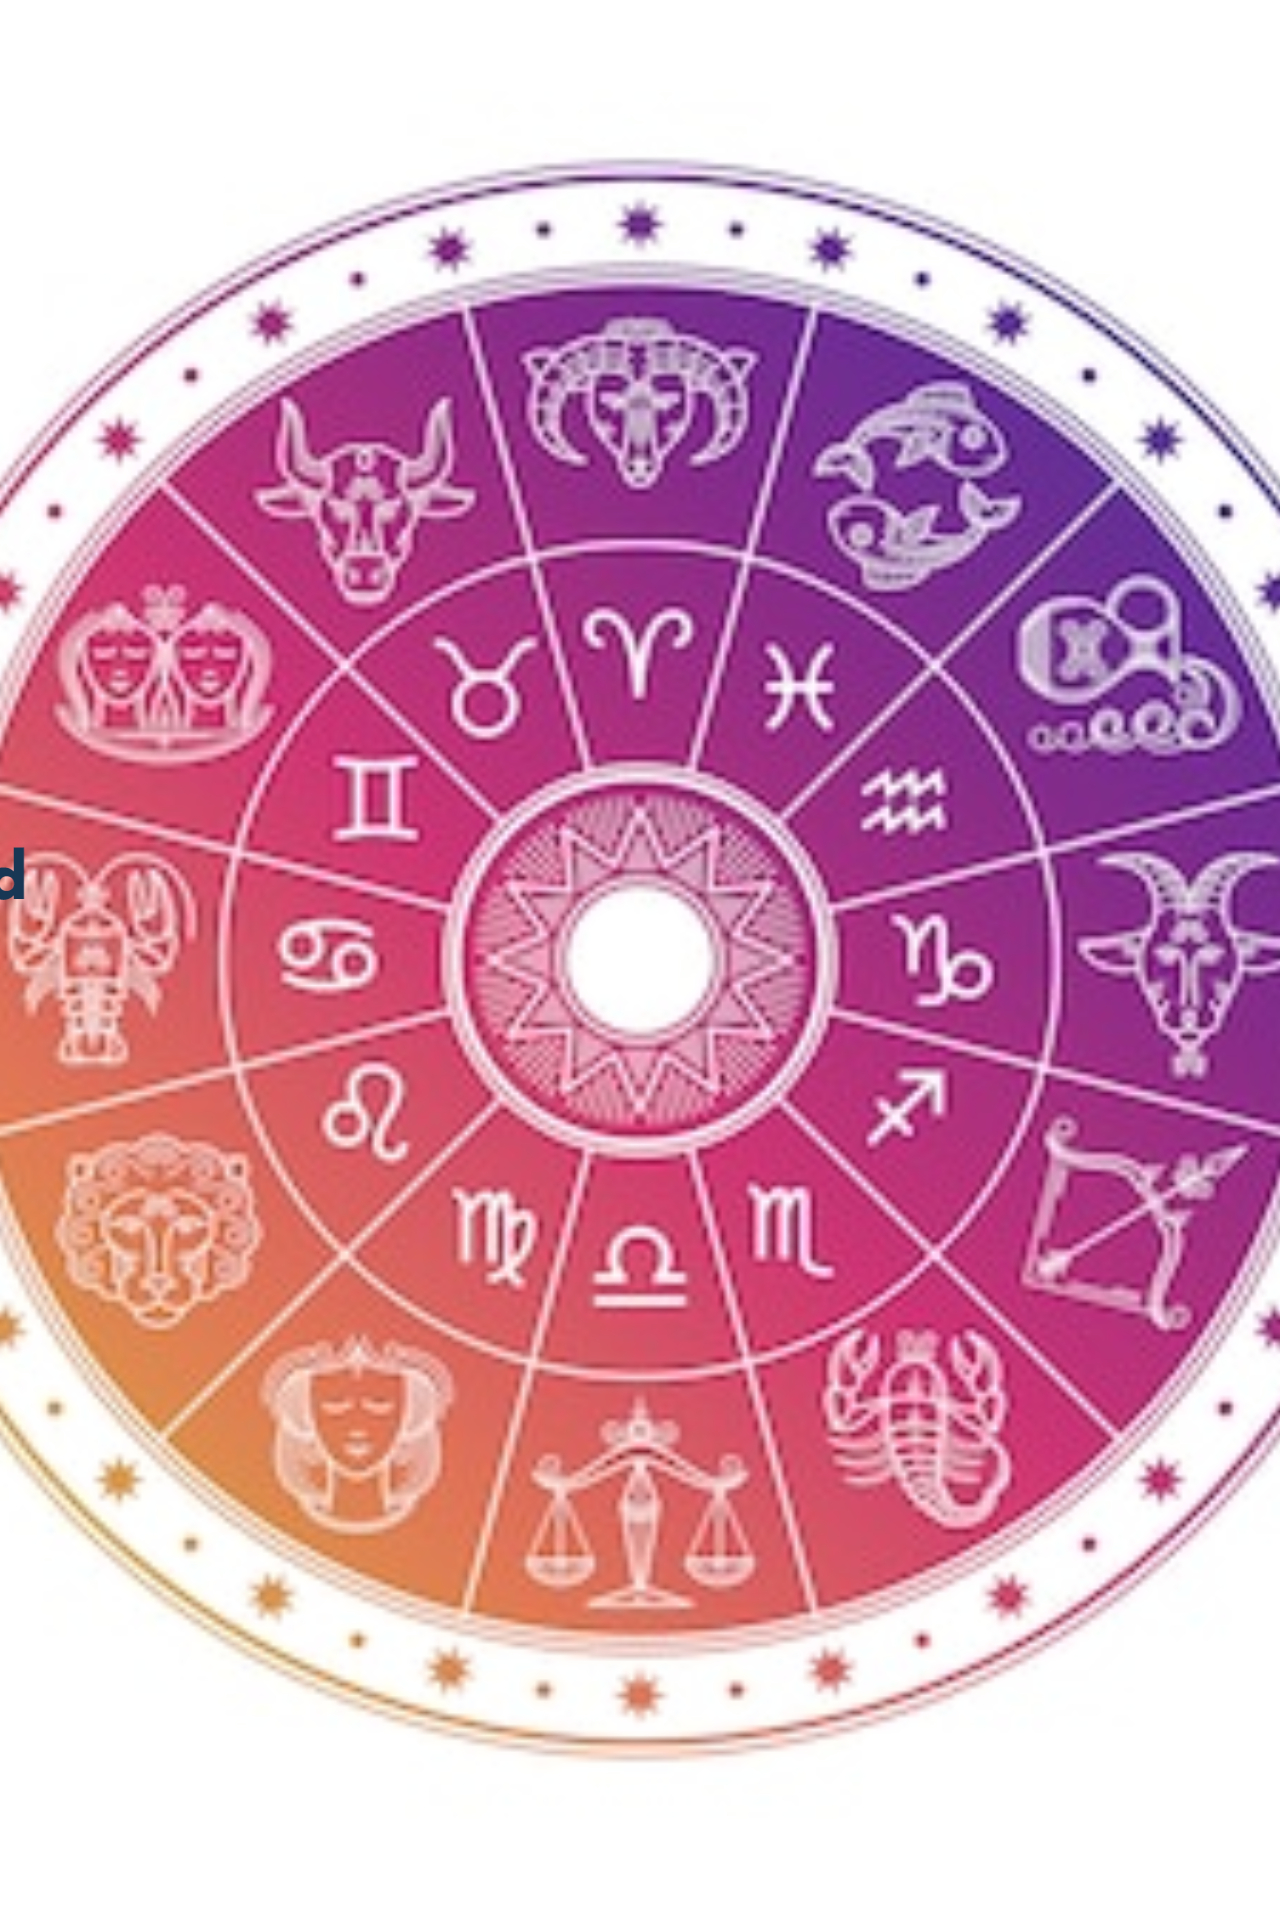 Horoscope Today, September 25: Know the lucky number and colour for all zodiac signs